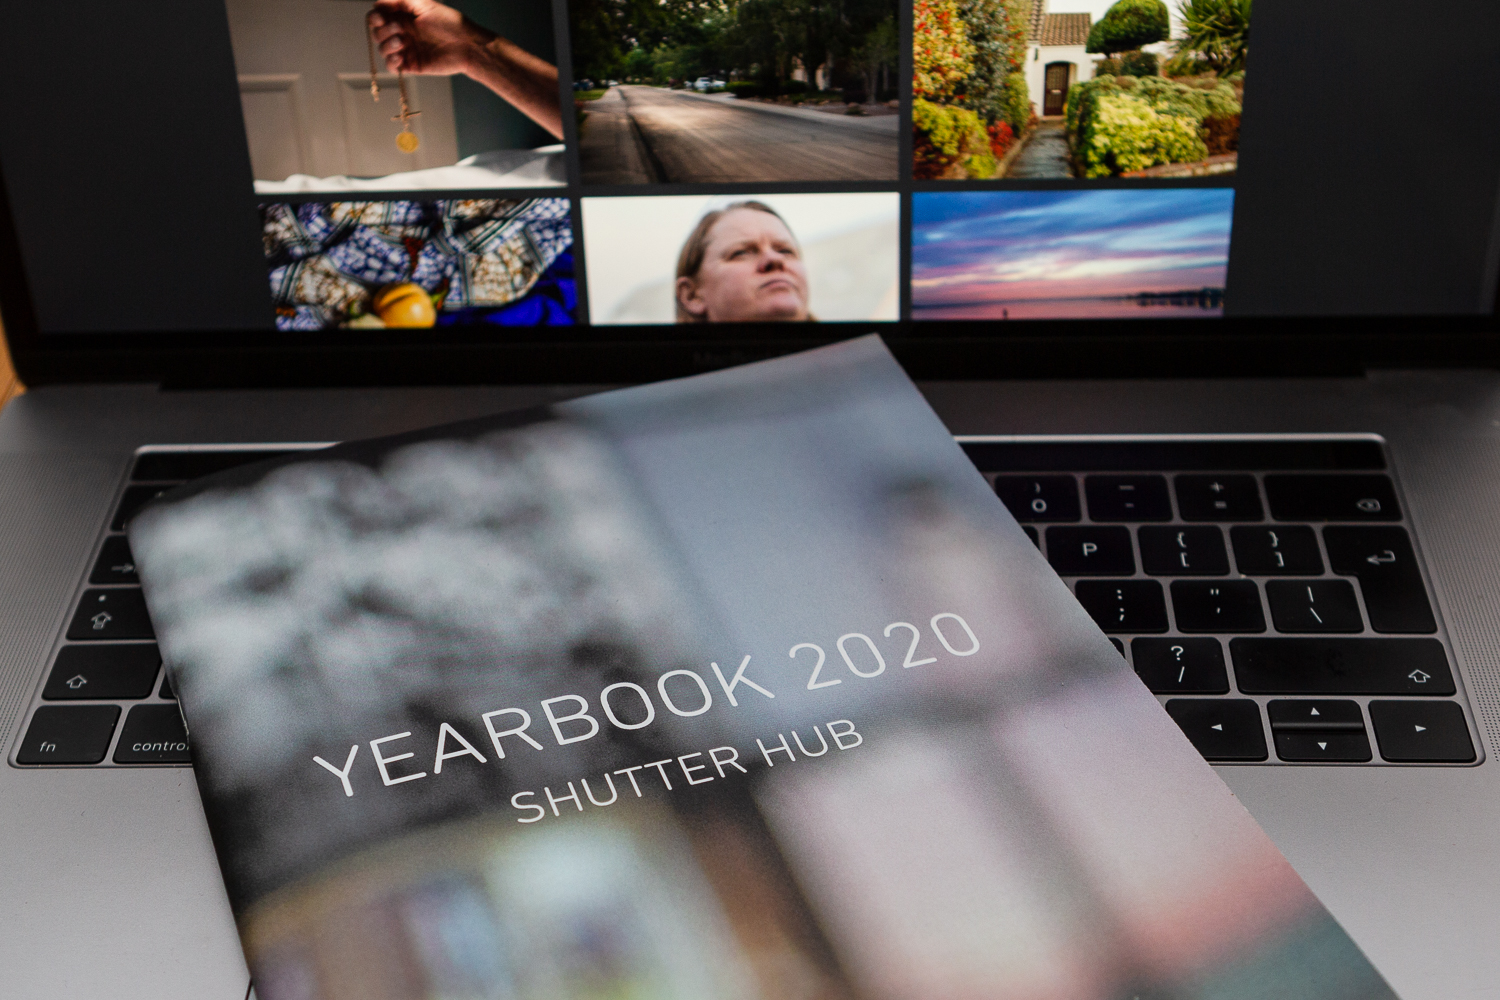 The YEARBOOK 2020 publication lying on the keyboard of a laptop, with images from the online exhibition on the screen behind.